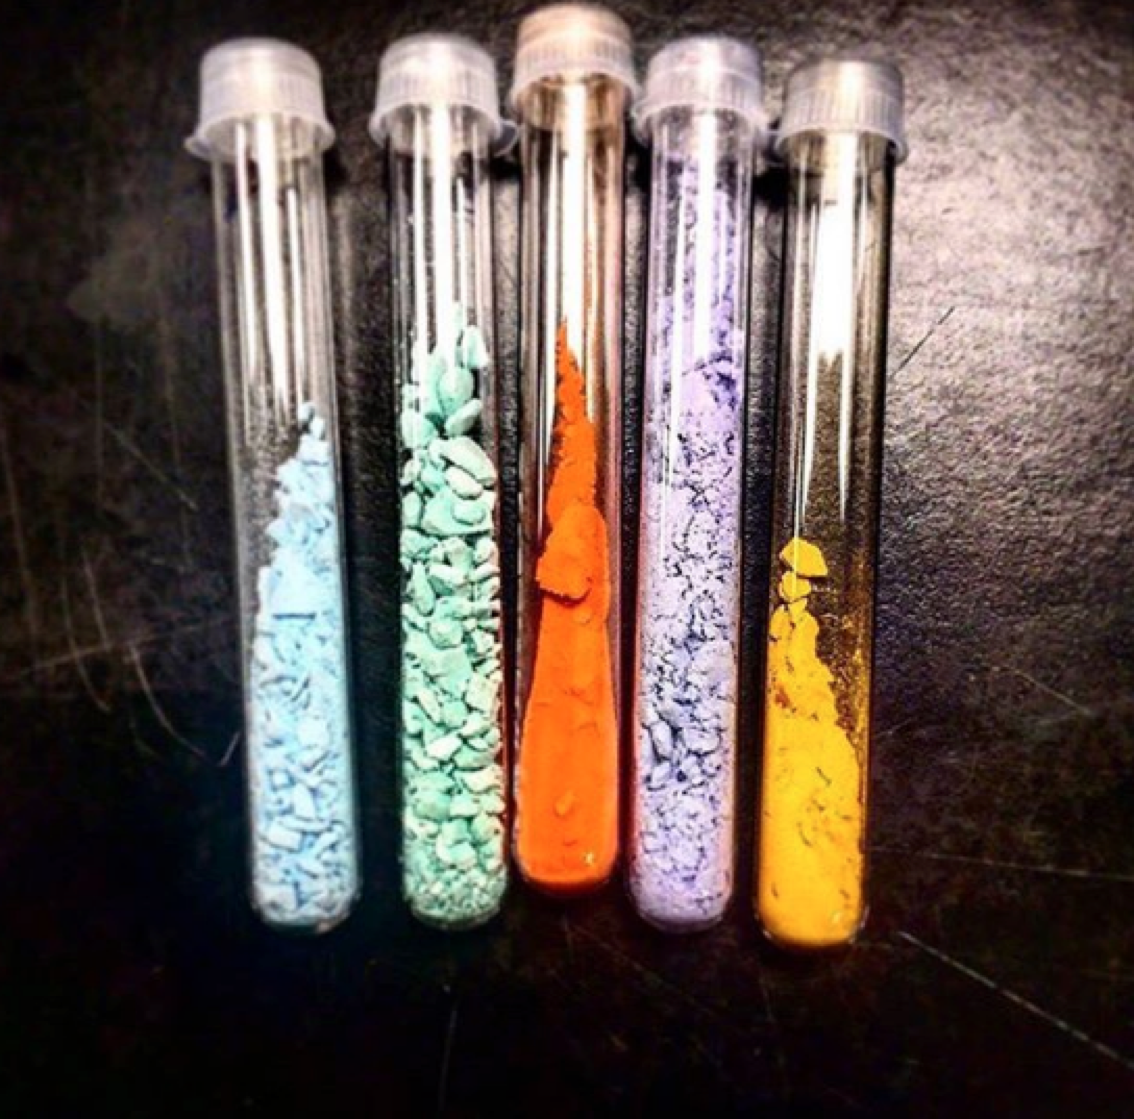 It's a #chemistry rainbow! Thank you to #UBCO Student @thaileur for the photo.